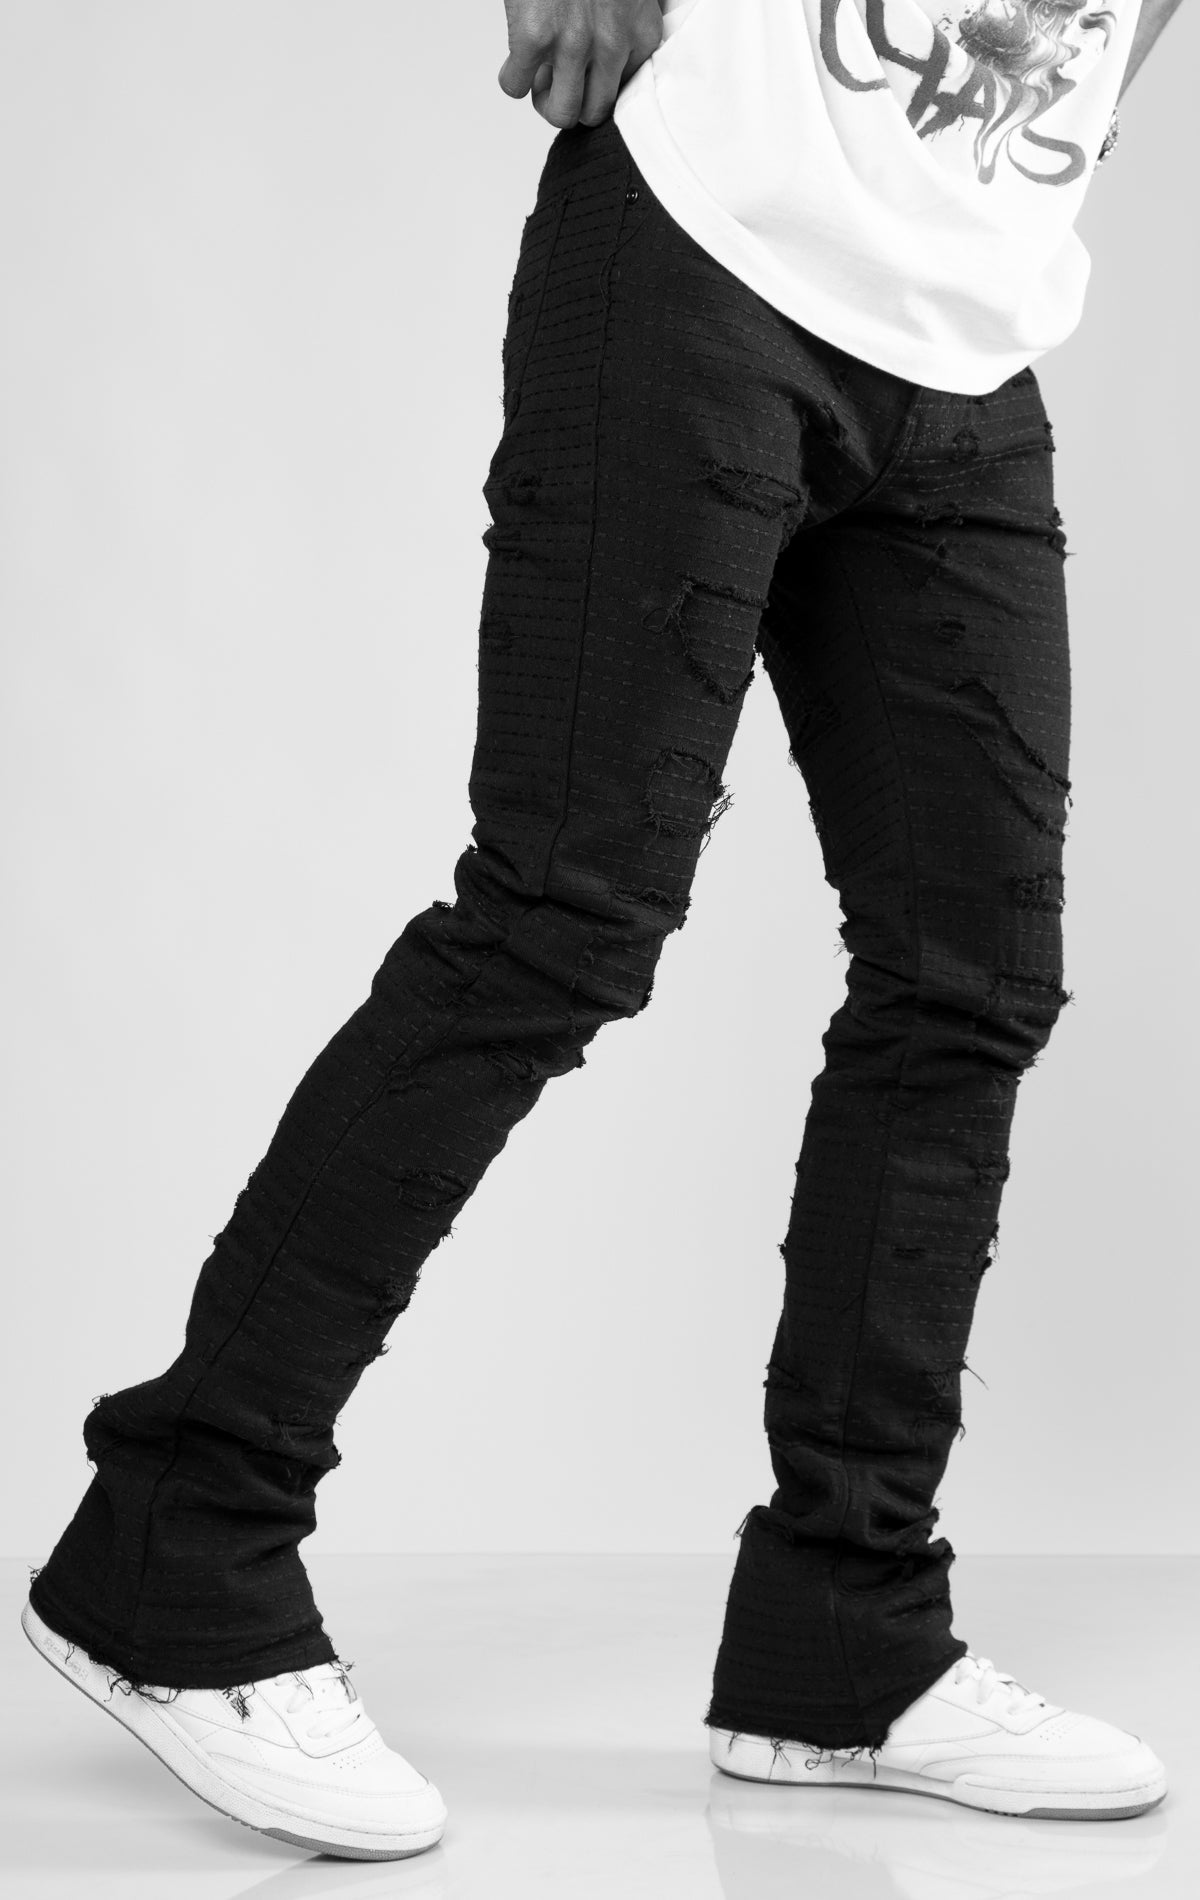 Jet black distressed denim jeans with ripped details and a stacked fit at the ankle.